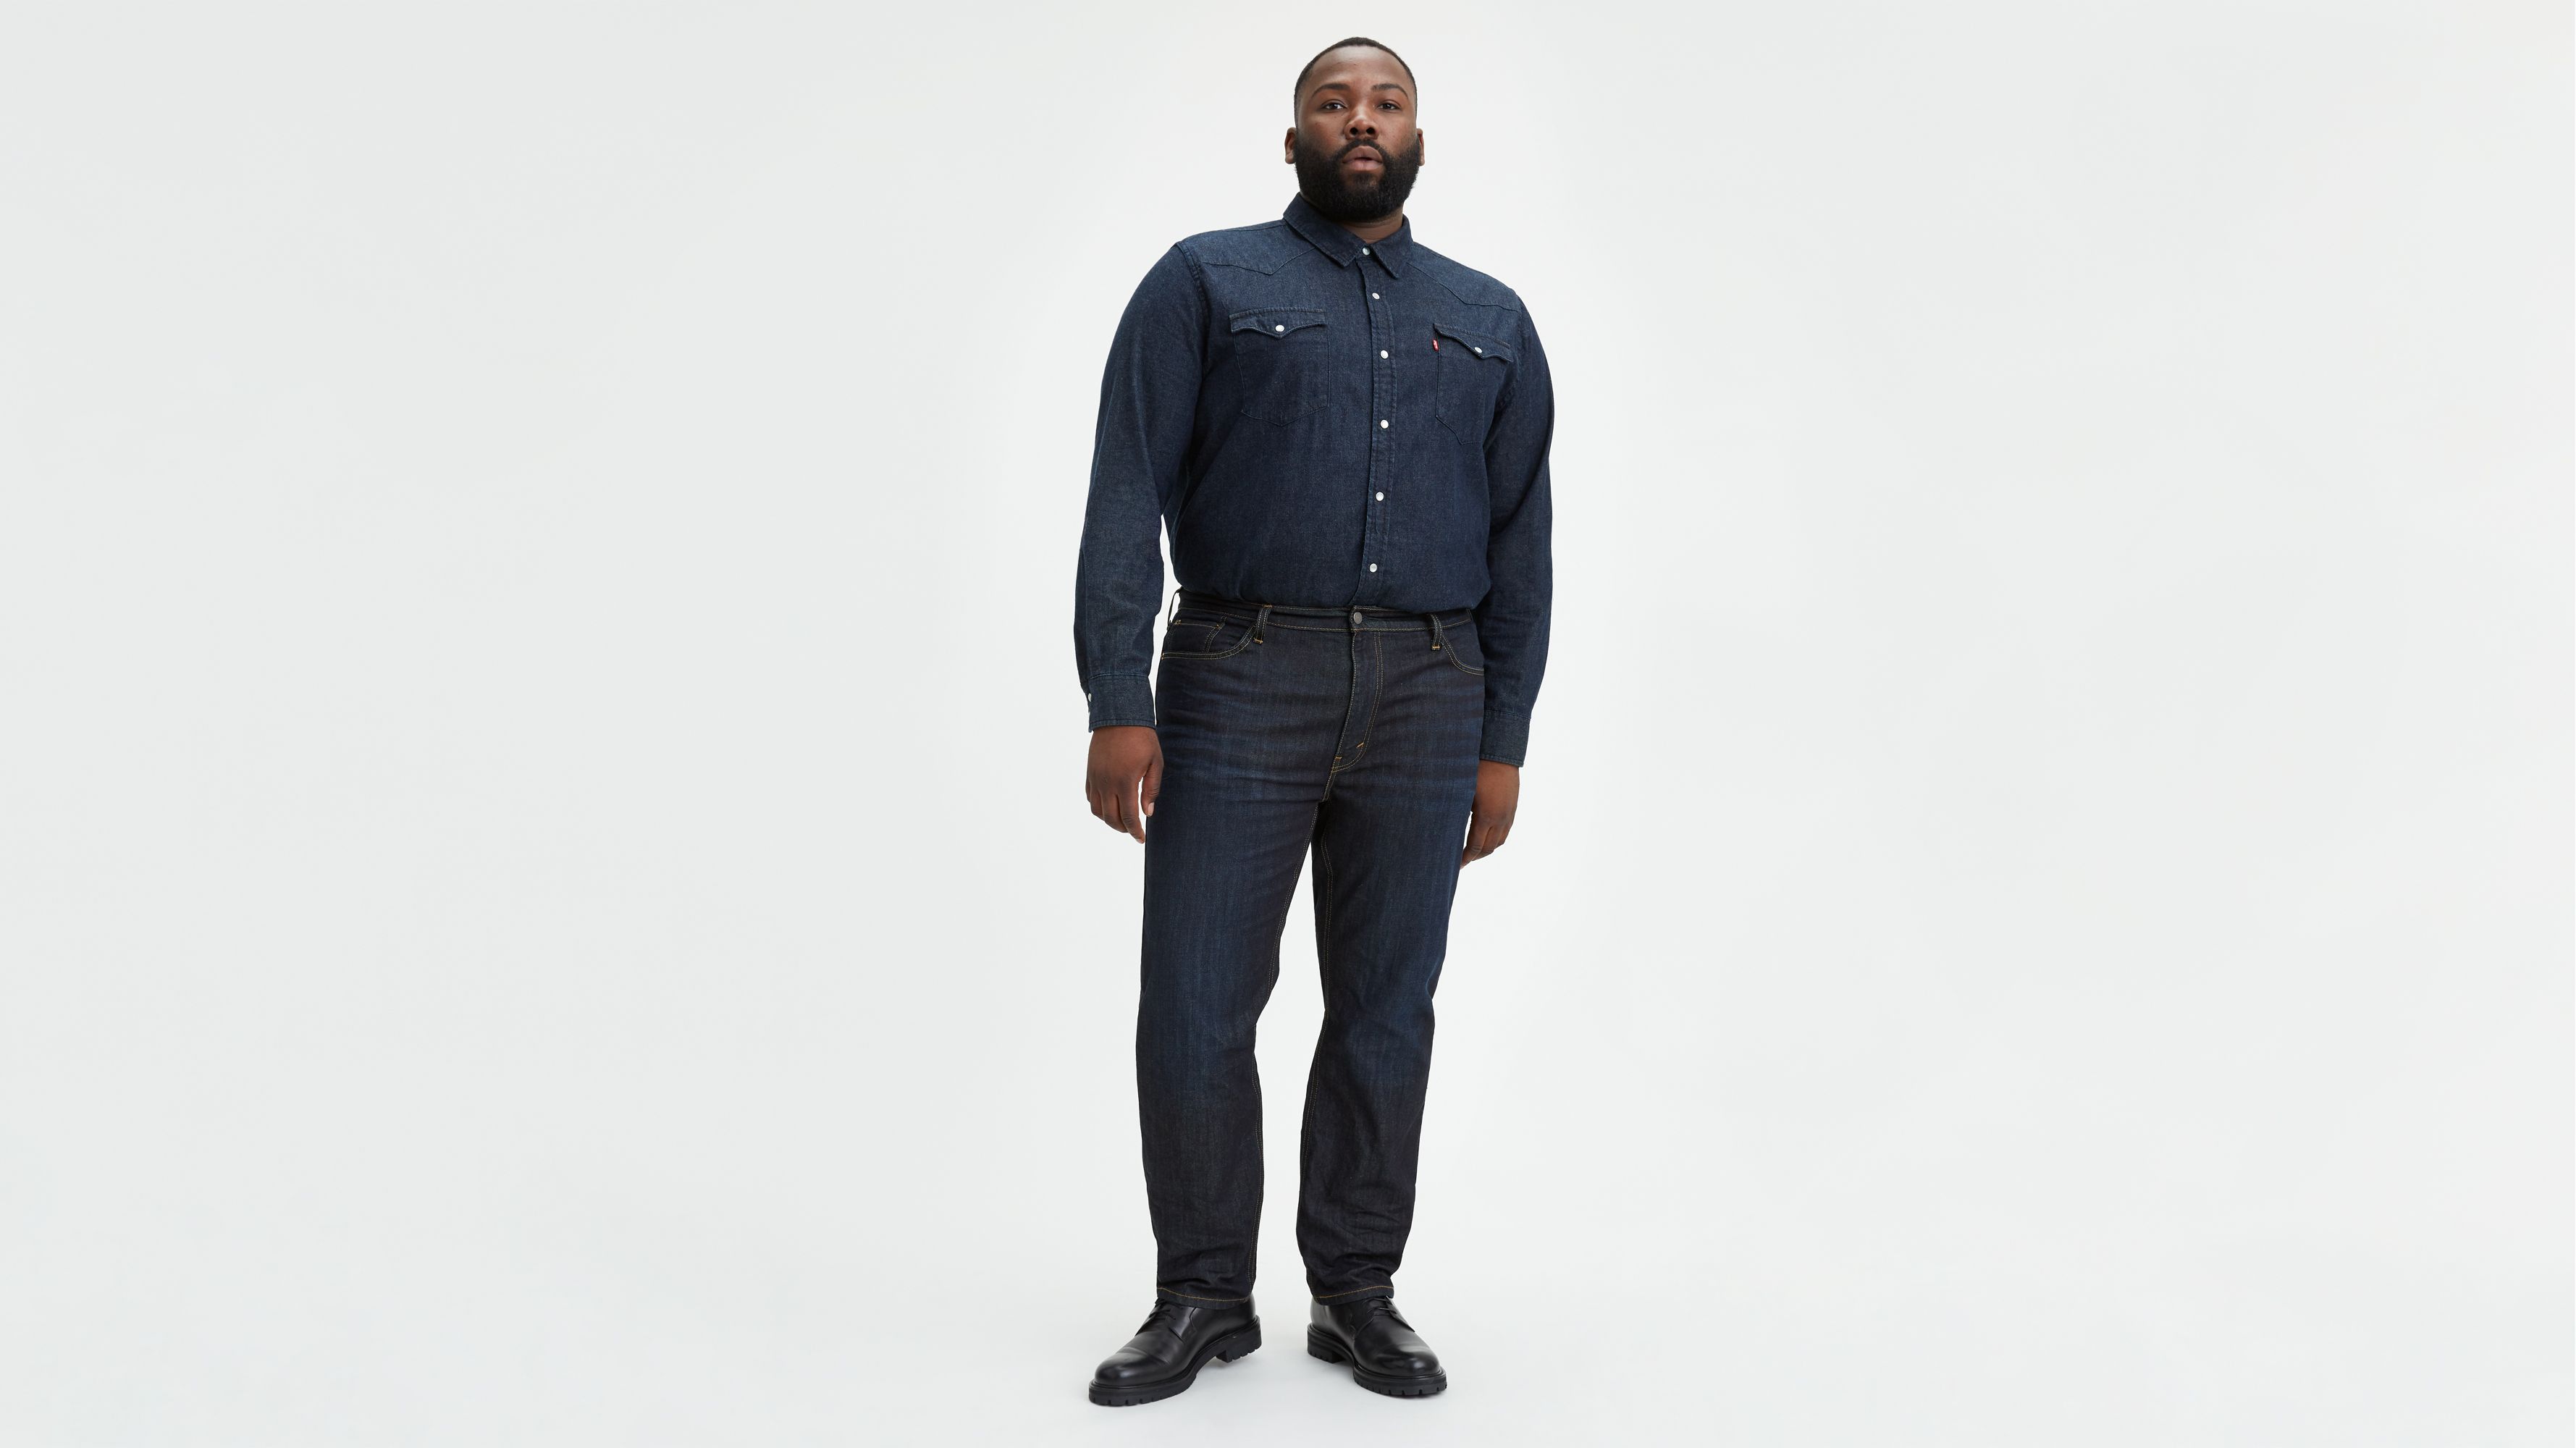 levi 541 big and tall jeans